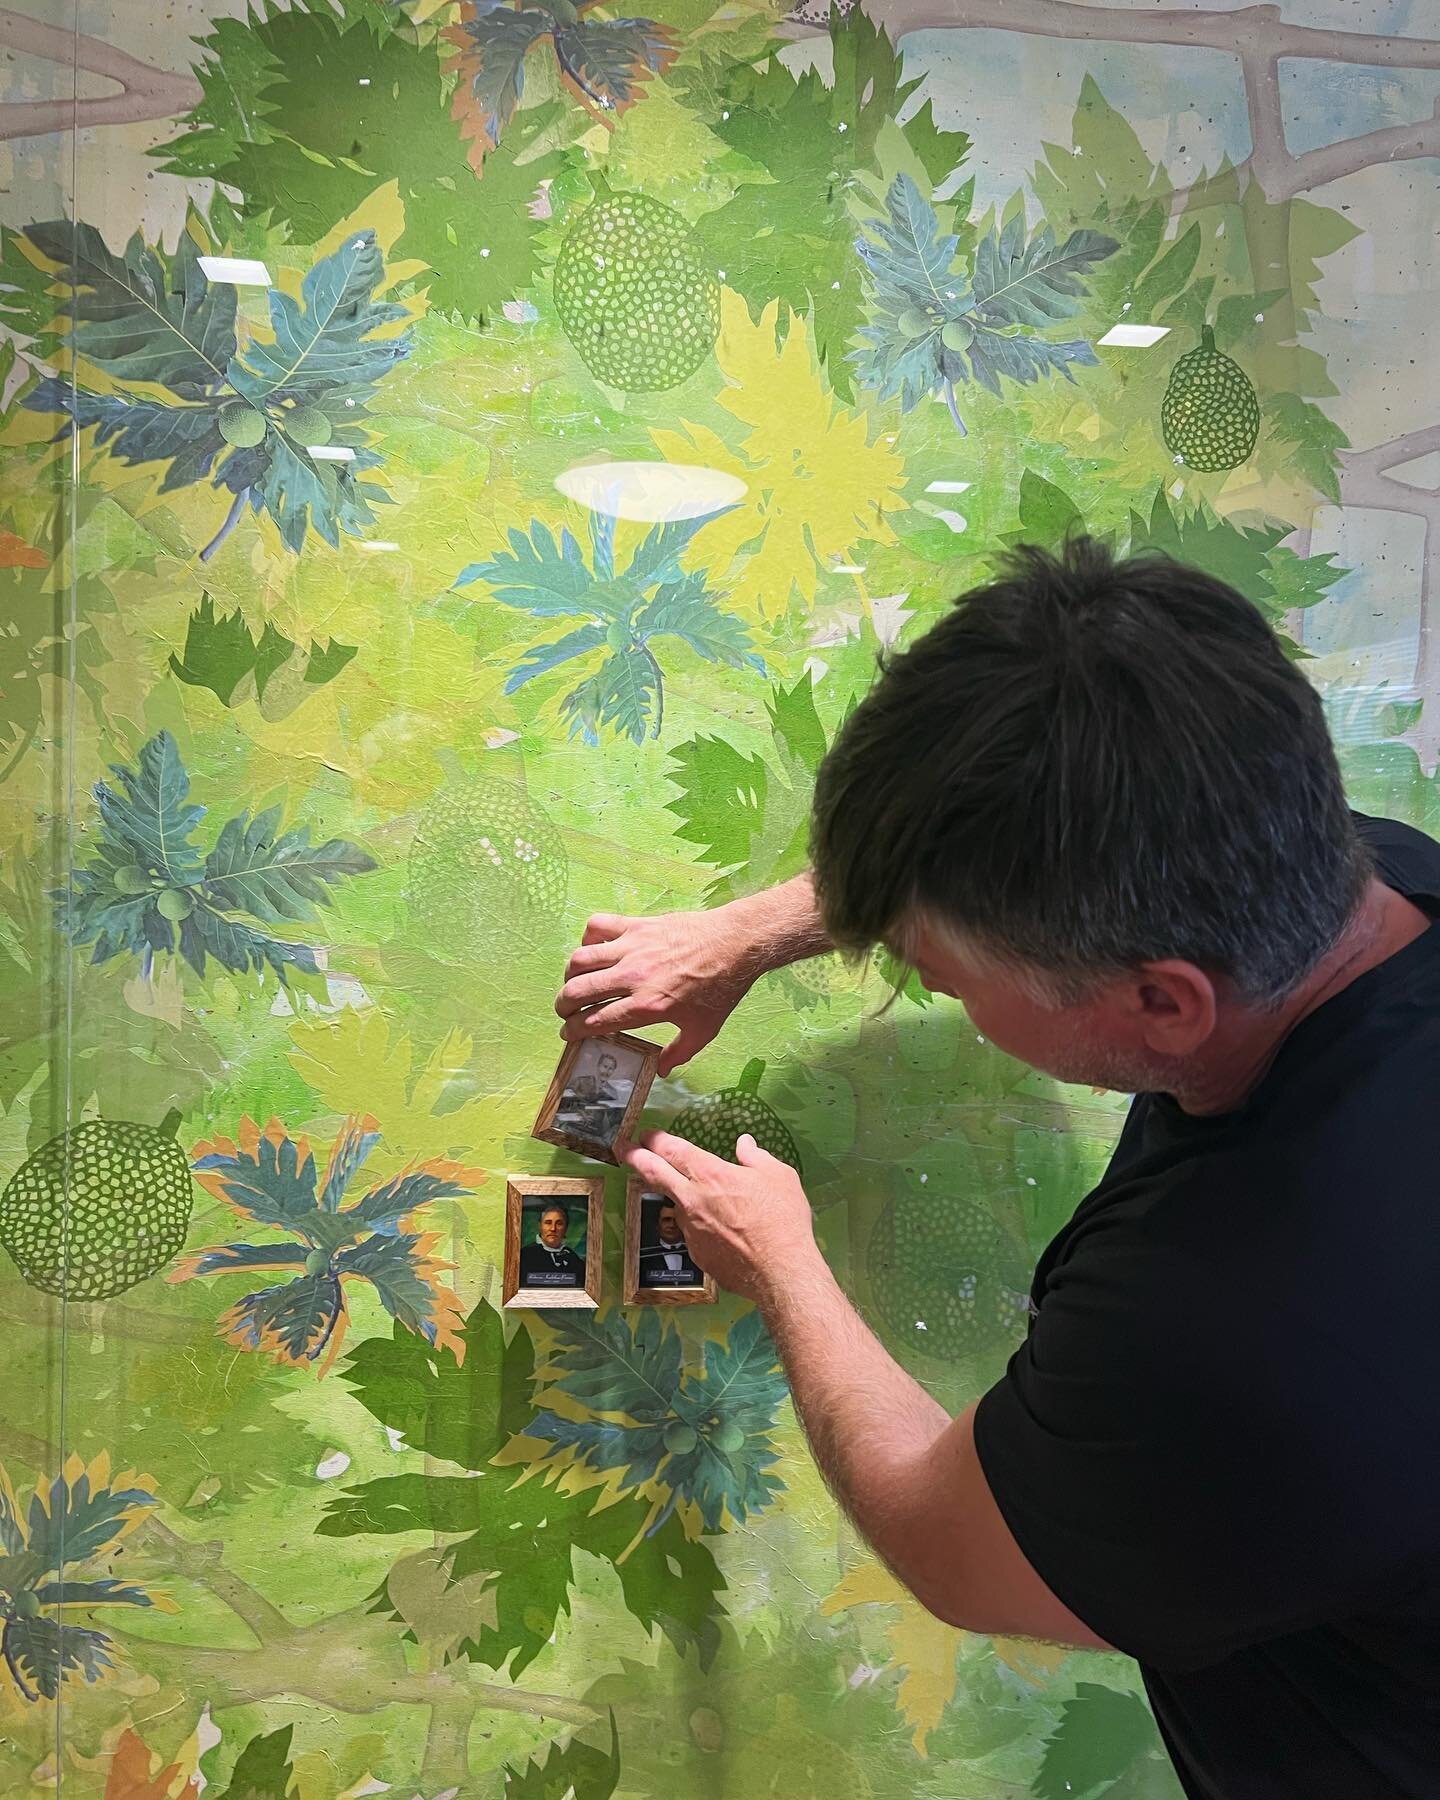 Starting to install  the family photos for the final completion of the Robinson estate trust office&rsquo;s project in partnership with interior designer Louli Yardley. Original artwork by @margoshepherdray. #artinstallationhawaii #arthandlinghawaii 